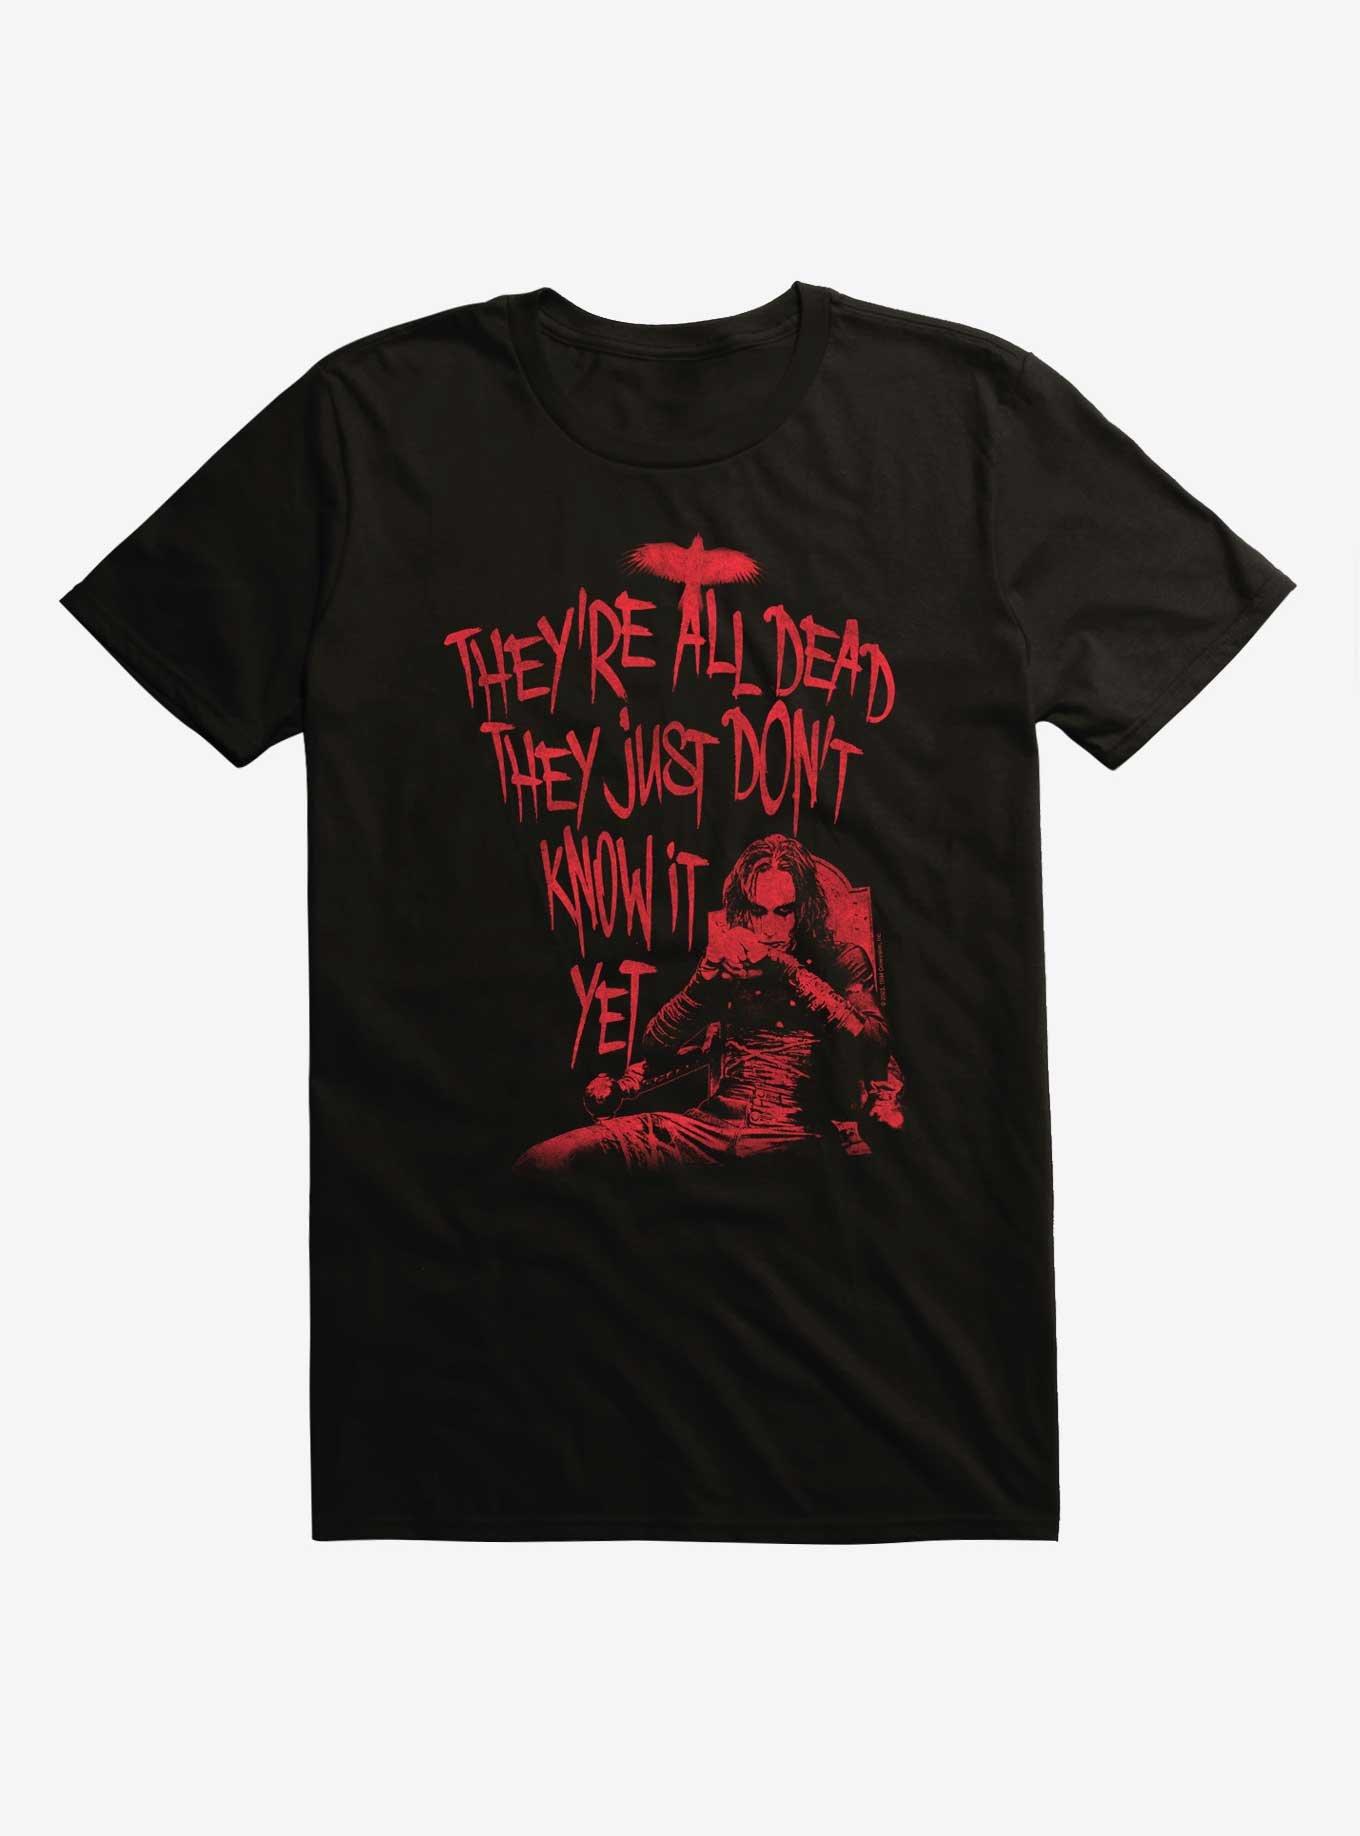 The Crow They Just Don't Know It Yet T-Shirt